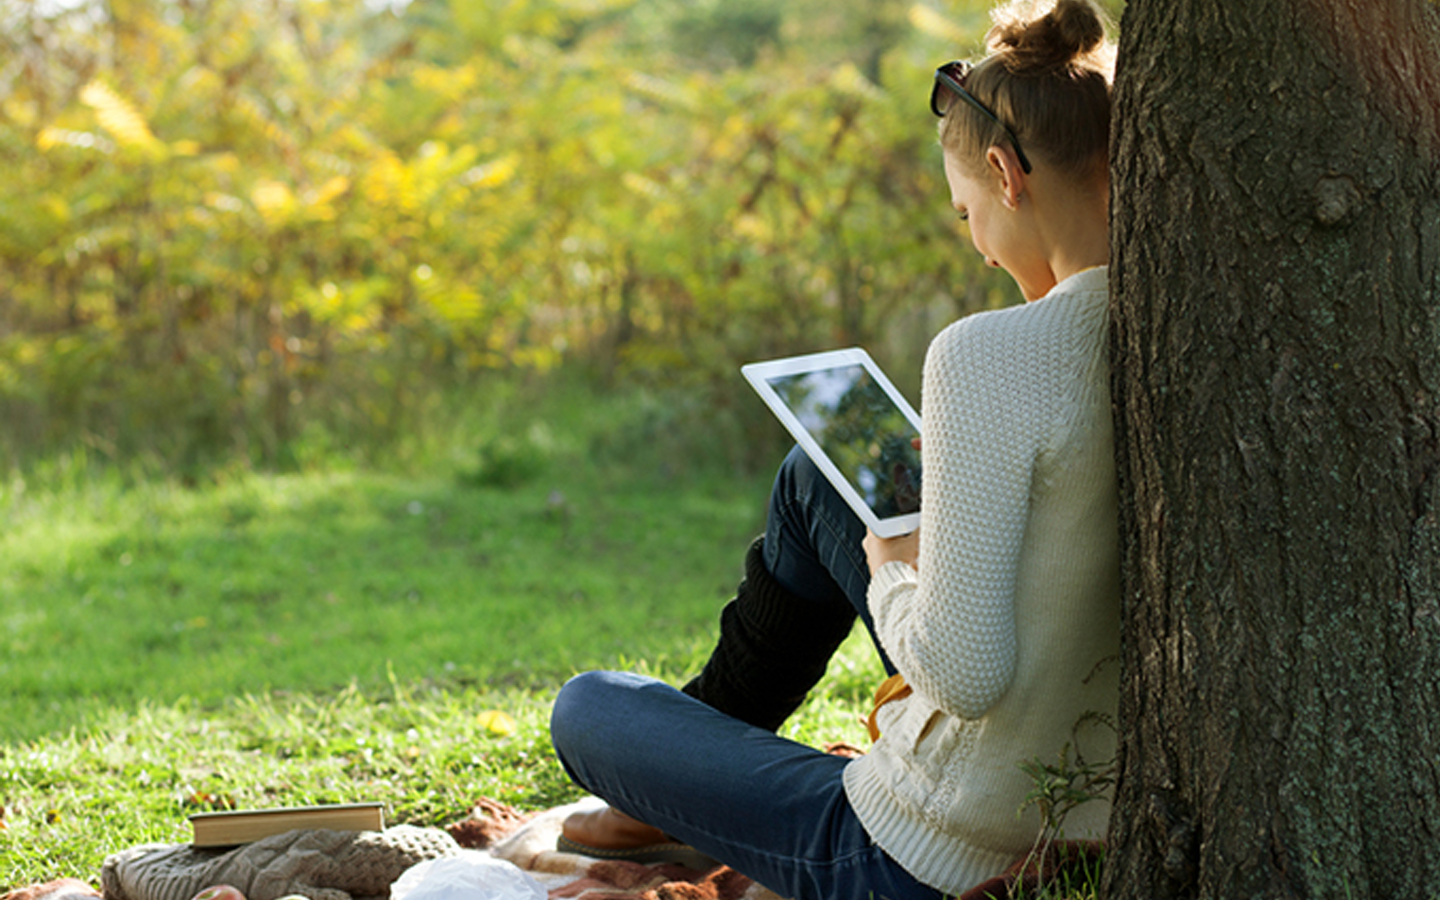 A woman reads from an iPad in the park